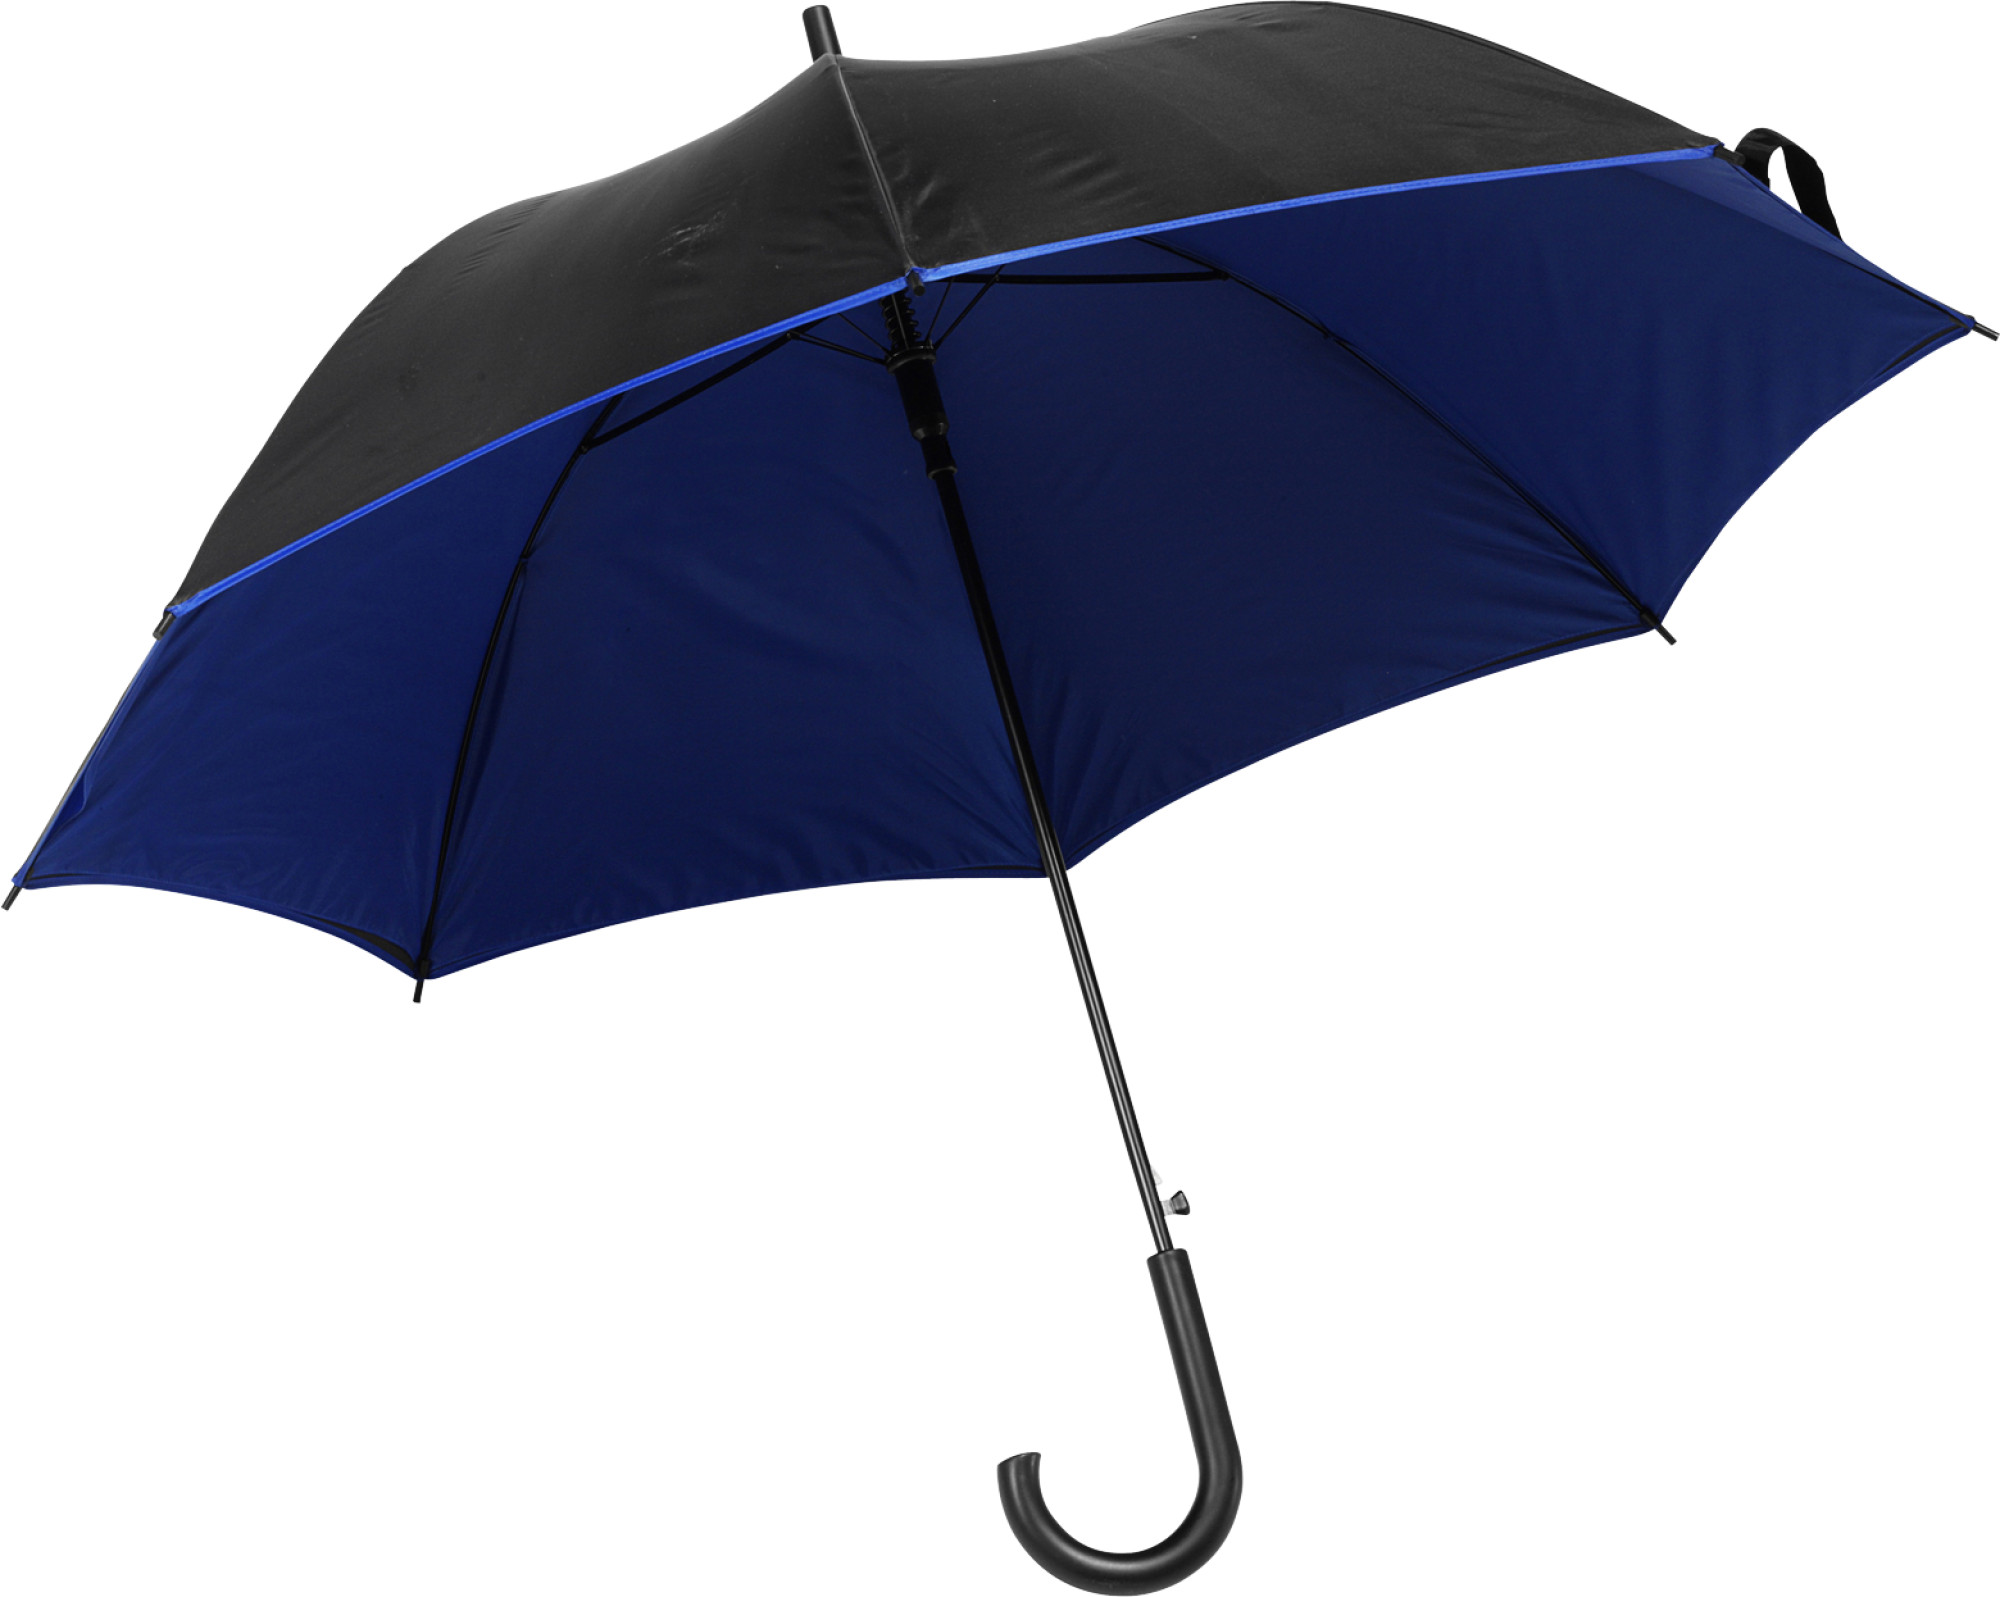 Promotional Umbrella with automatic opening.